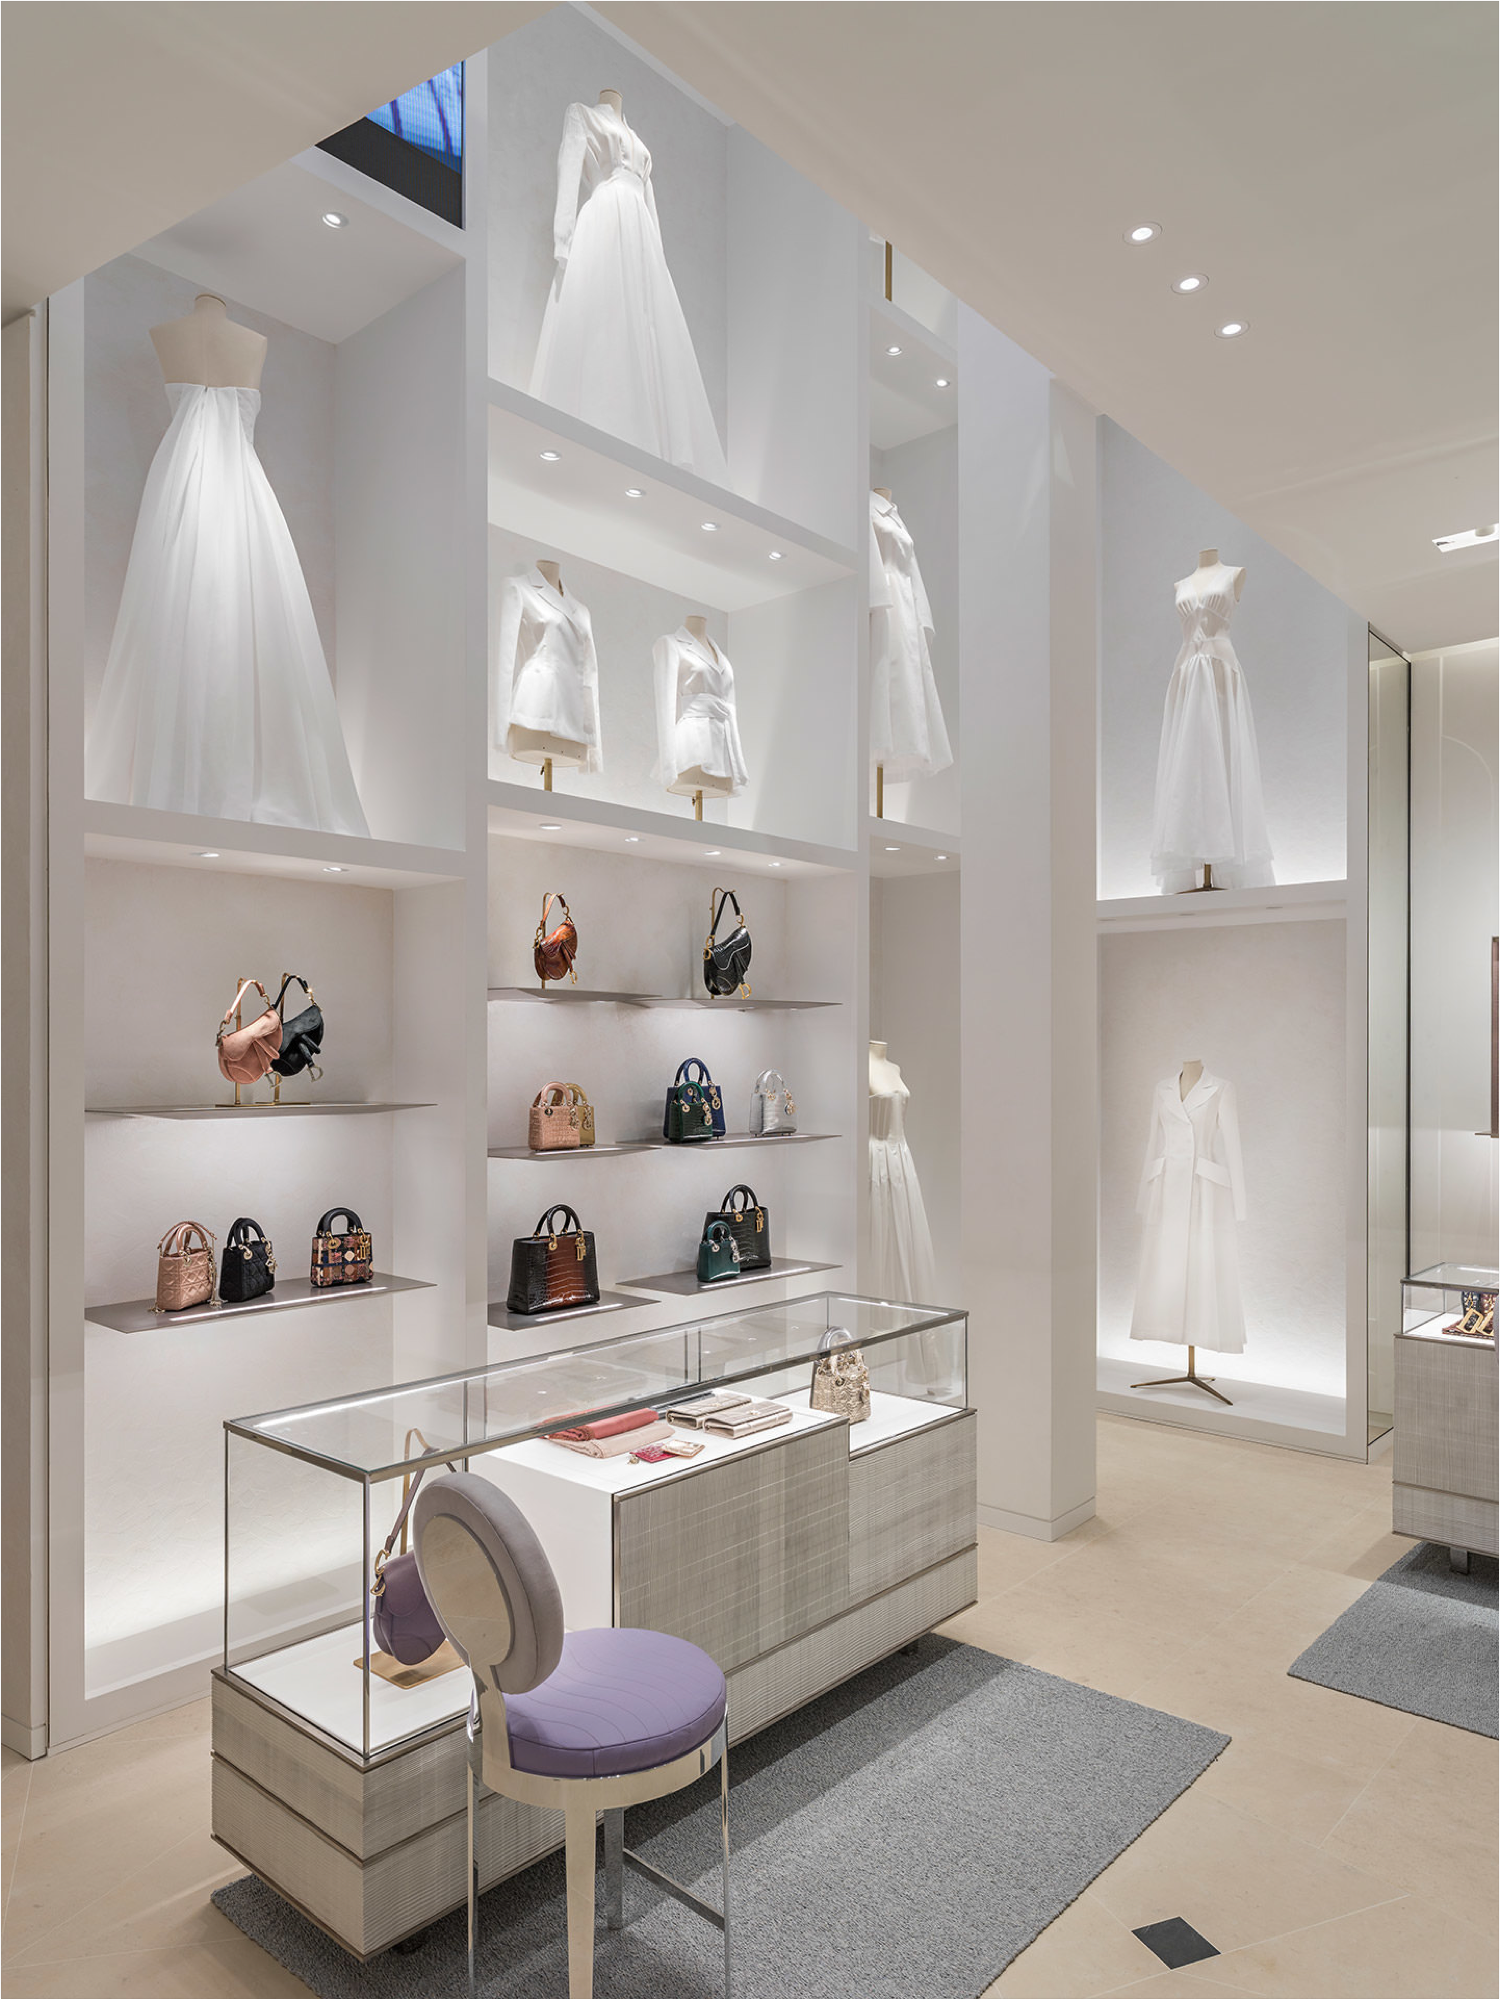 dior germany store